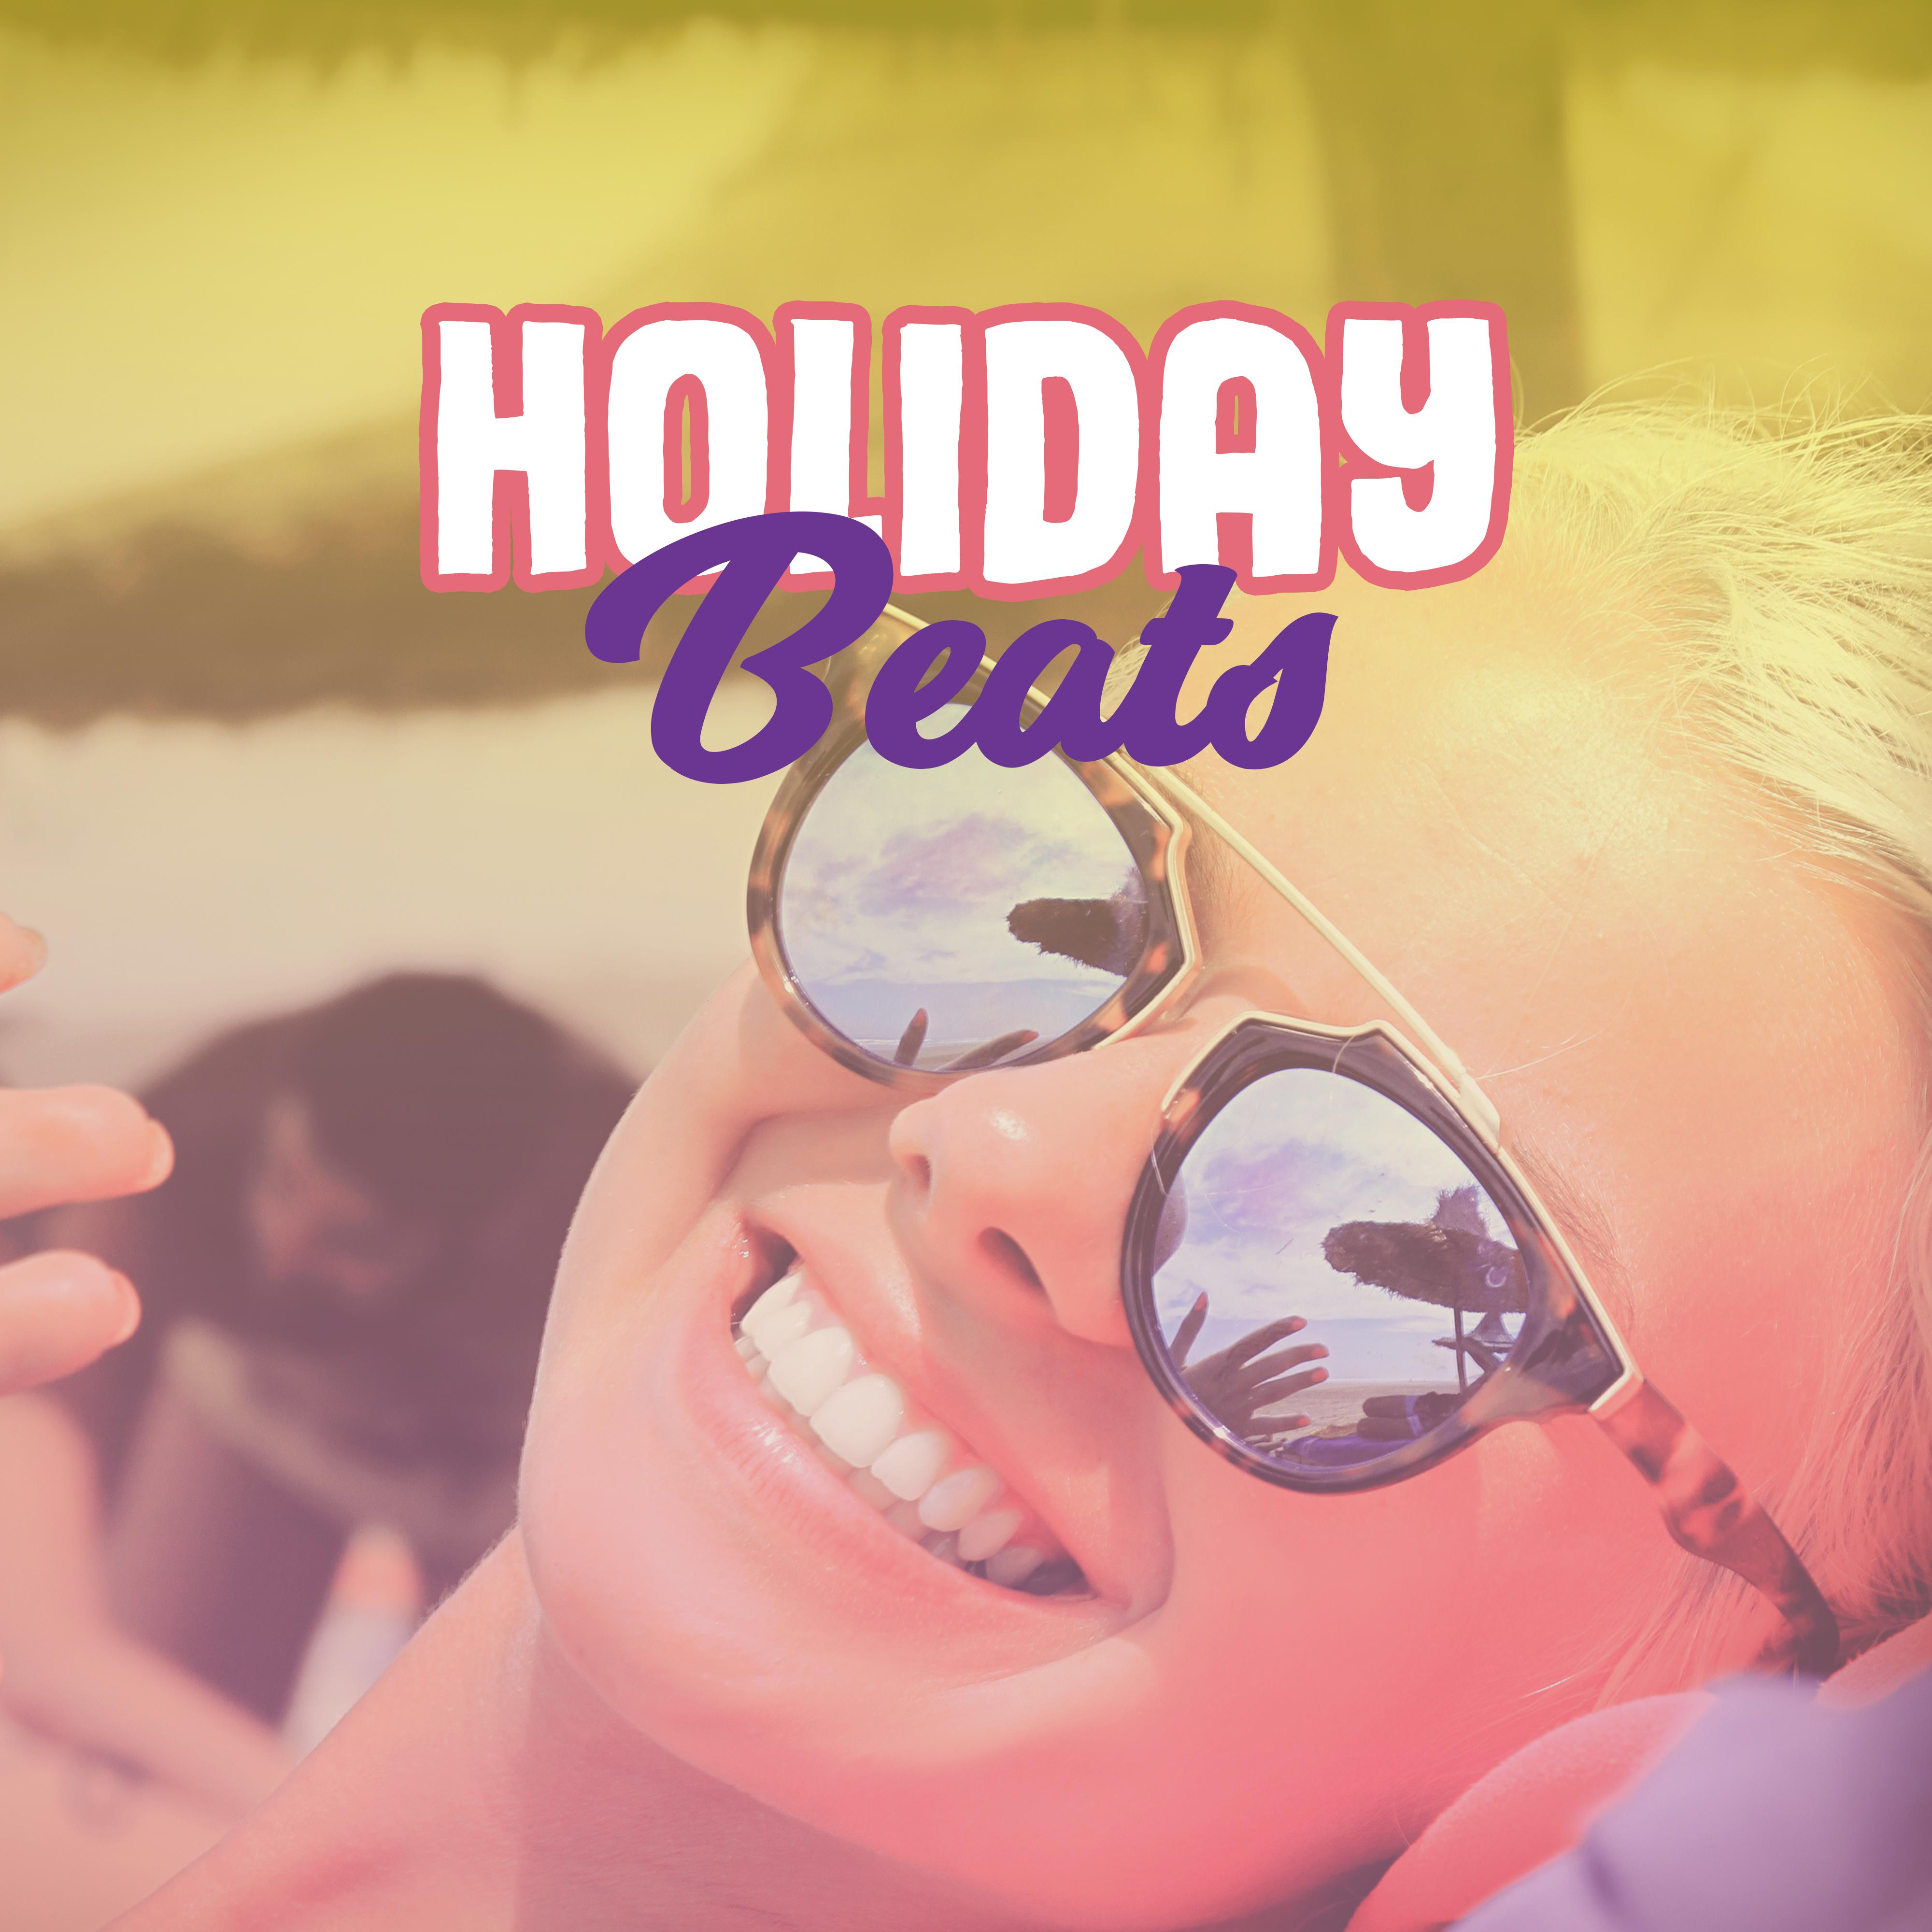 Holiday Beats  Vibes, Beach Party, Ibiza Lounge, Summertime, Dance Floor, Holiday Chill Out Music, Dance Party